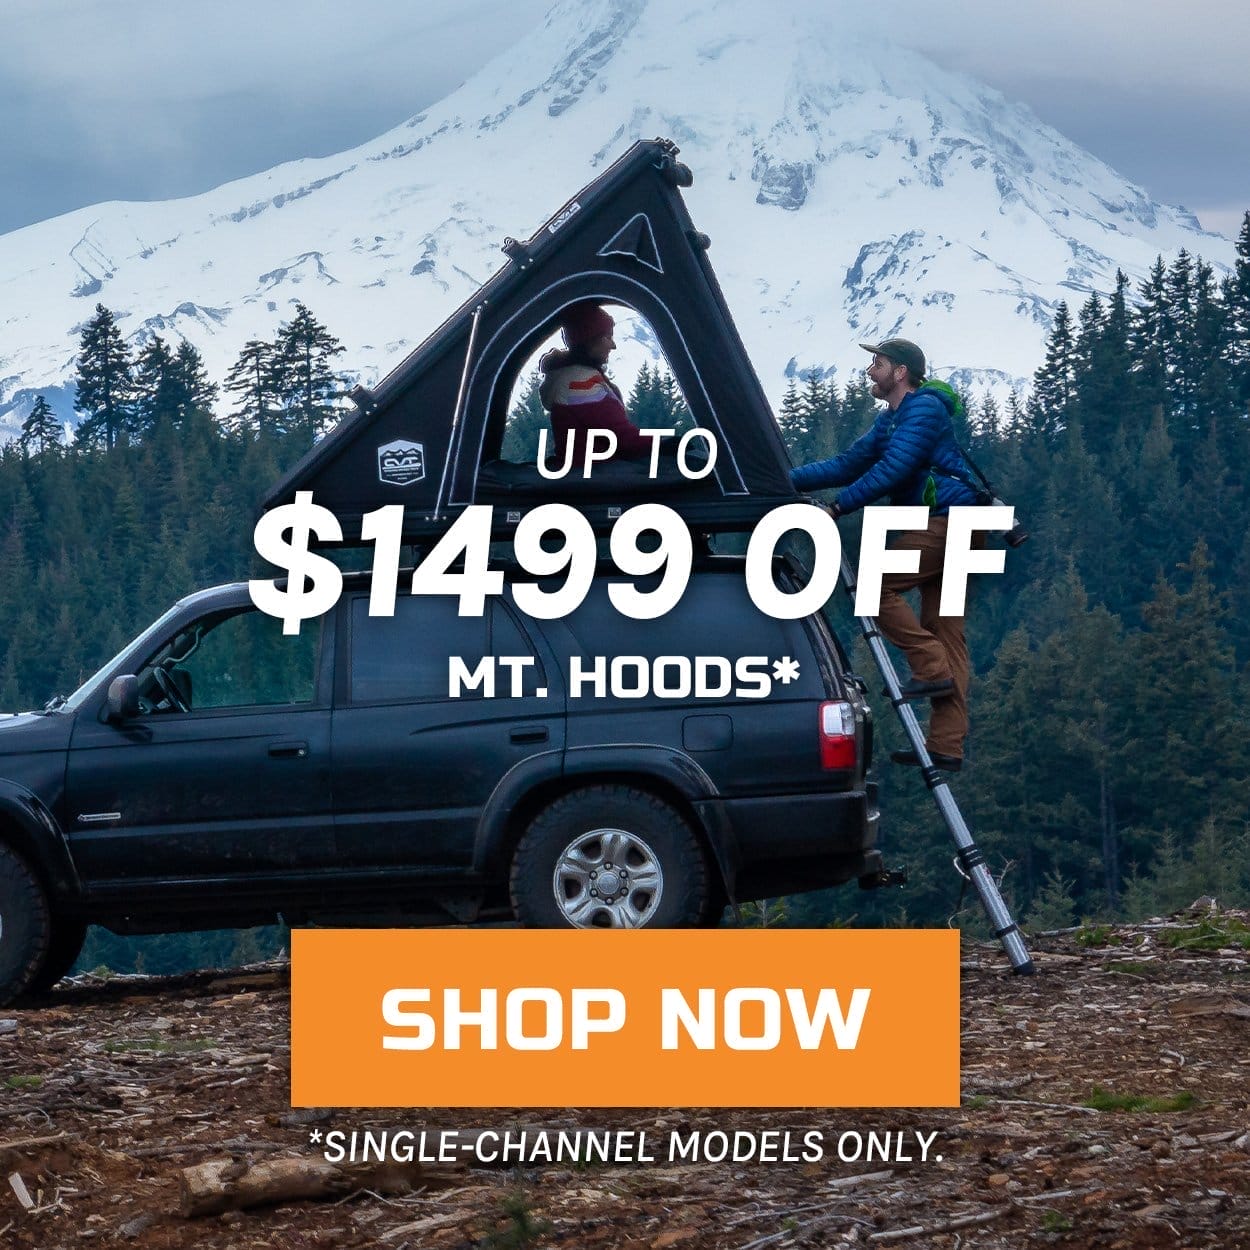 Up to \\$1499 off Mt. Hoods* *single-channel models only